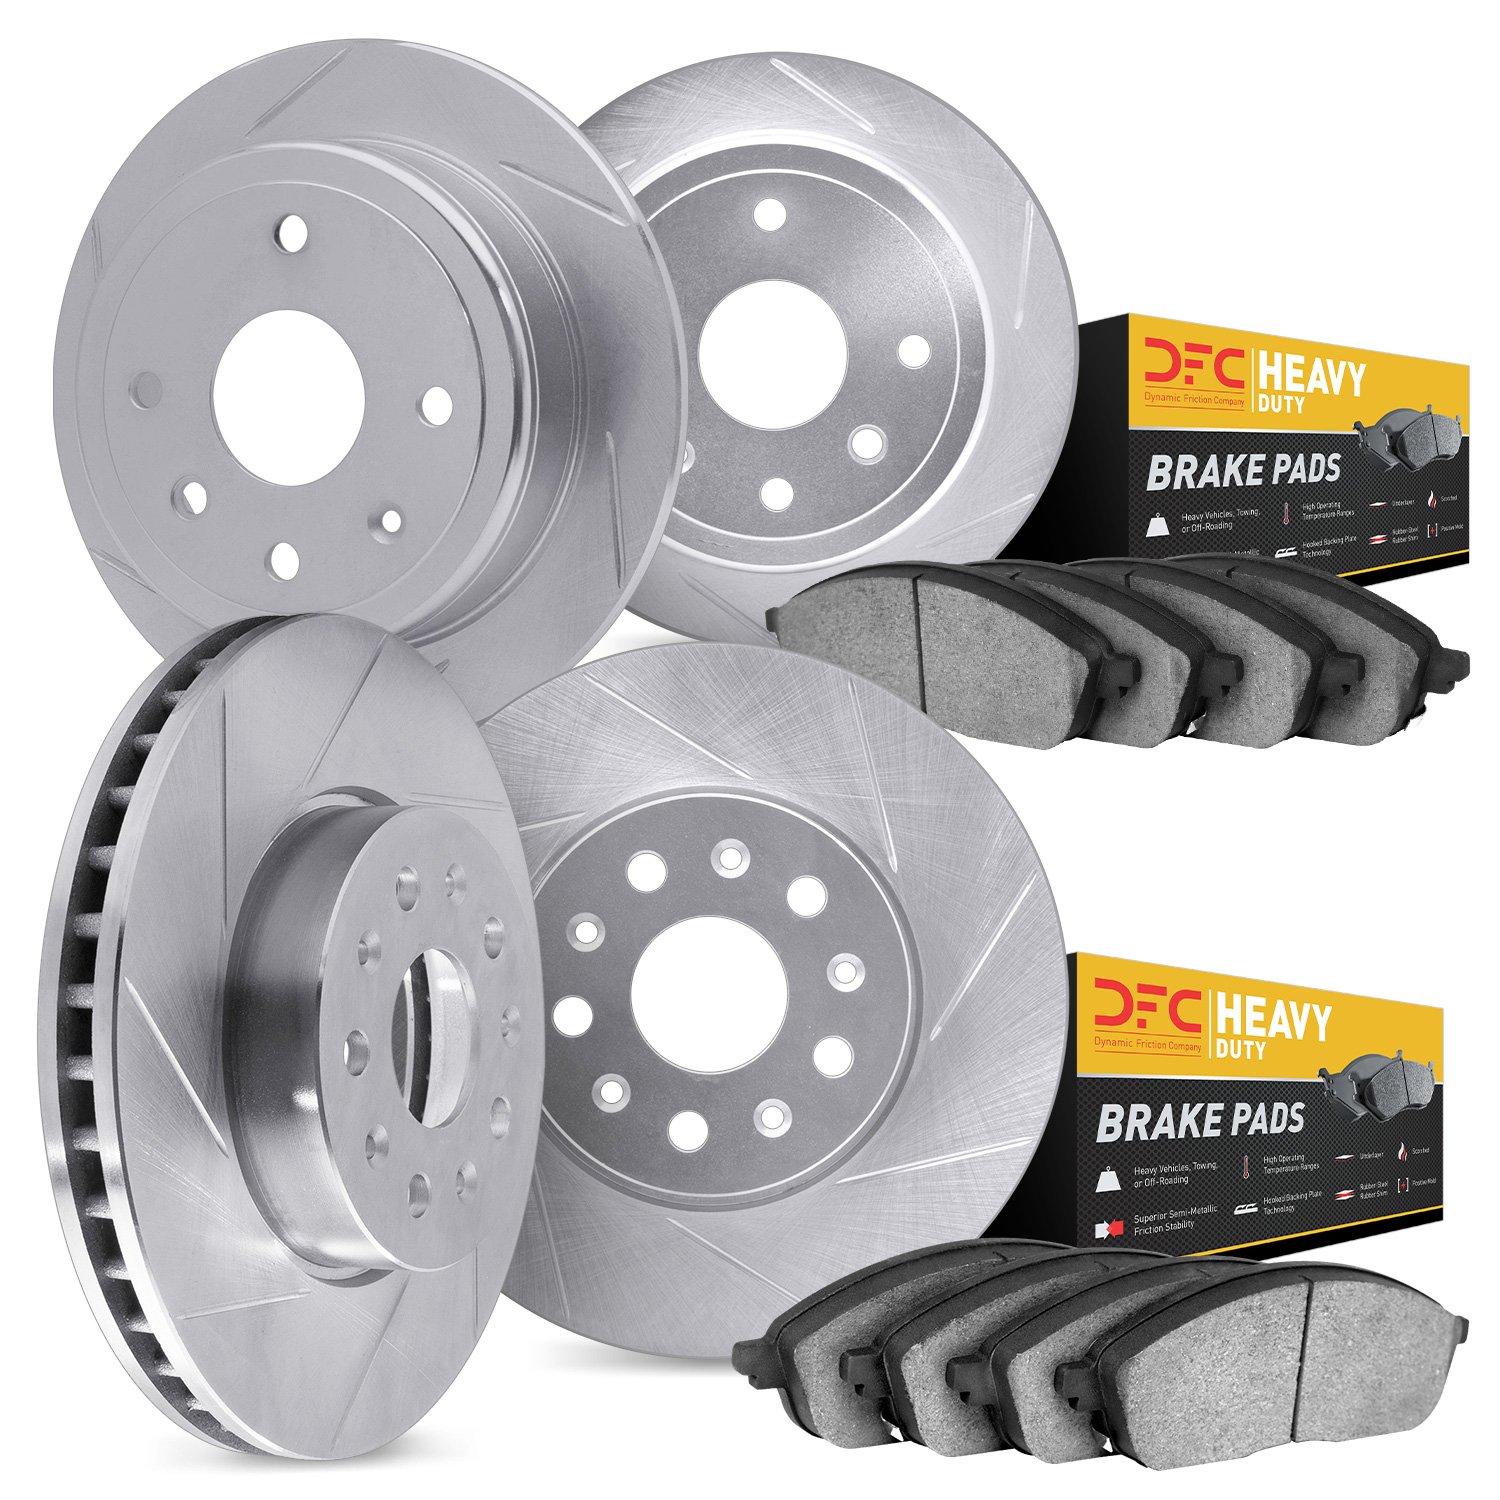 5204-99044 Slotted Brake Rotors w/Heavy-Duty Brake Pads Kits [Silver], 2001-2002 Ford/Lincoln/Mercury/Mazda, Position: Front and